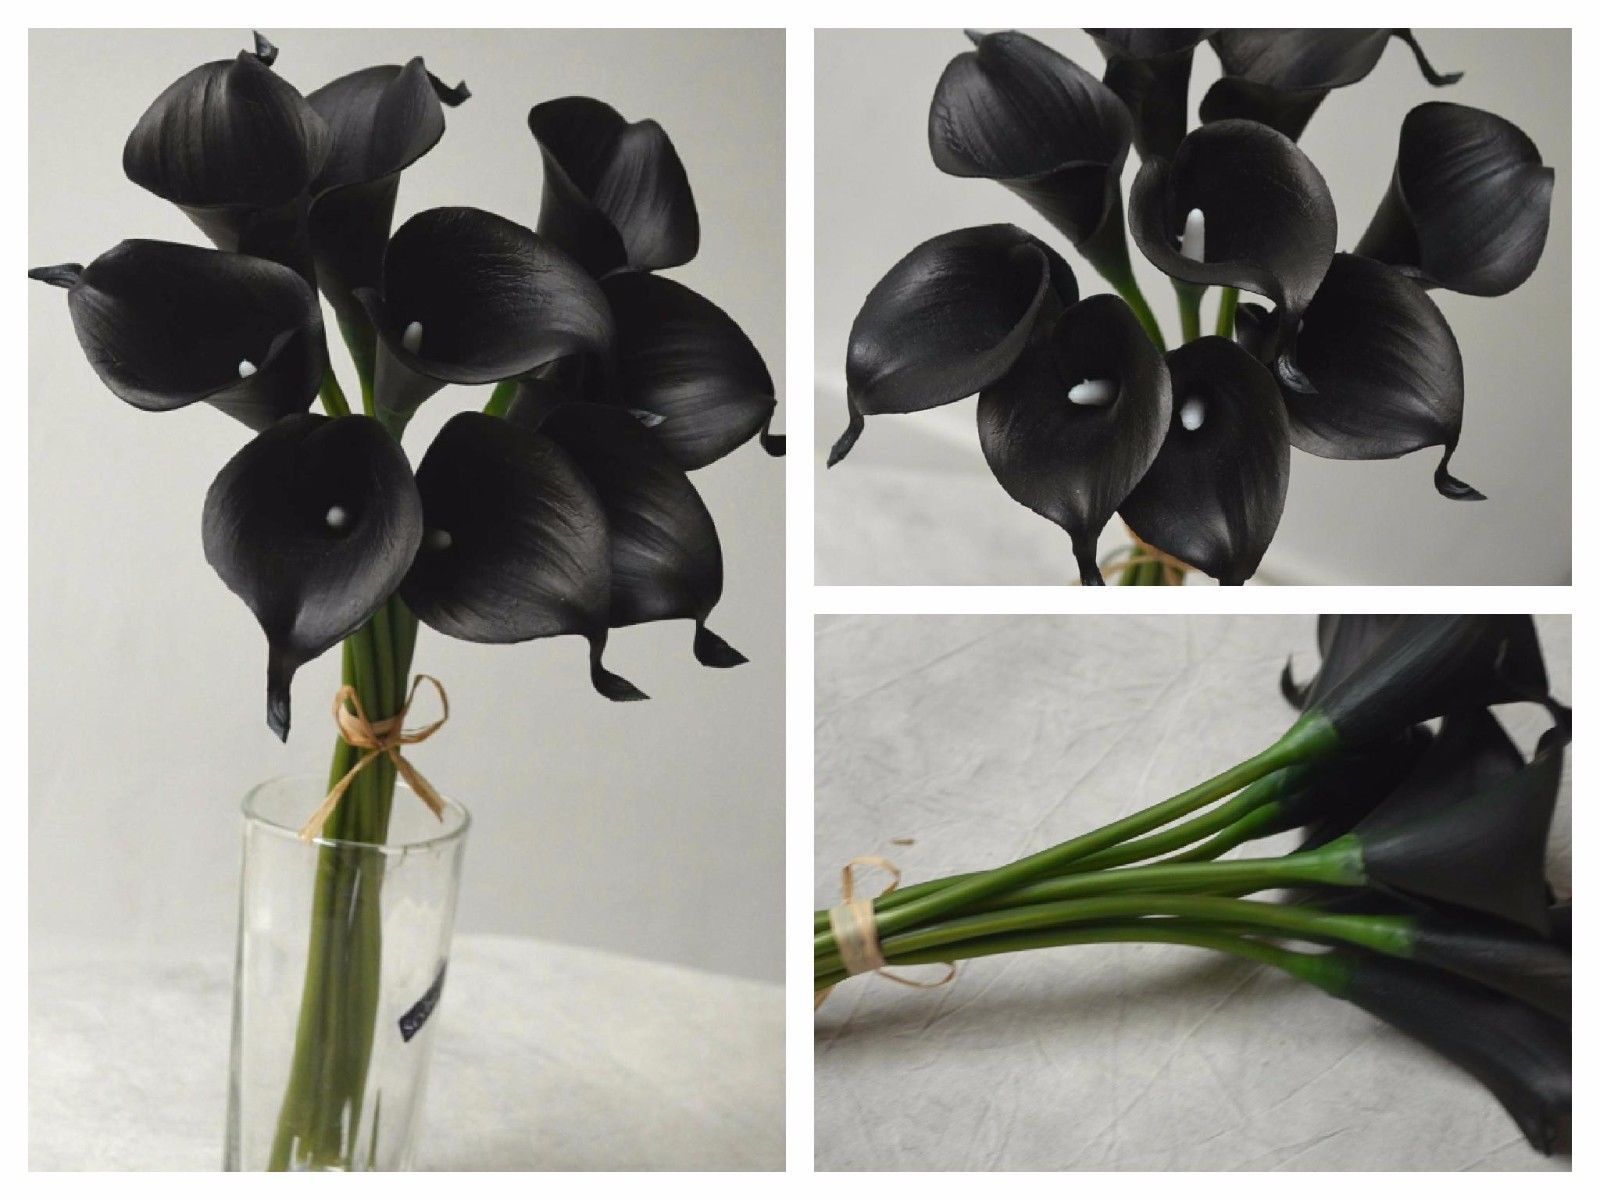 2020 10 Single Stem Real Touch Flowers Black Calla Lily Black Flowers Silk For Bridal Bouquet Wedding Home Decor From Hyh2013 5 03 Dhgate Com